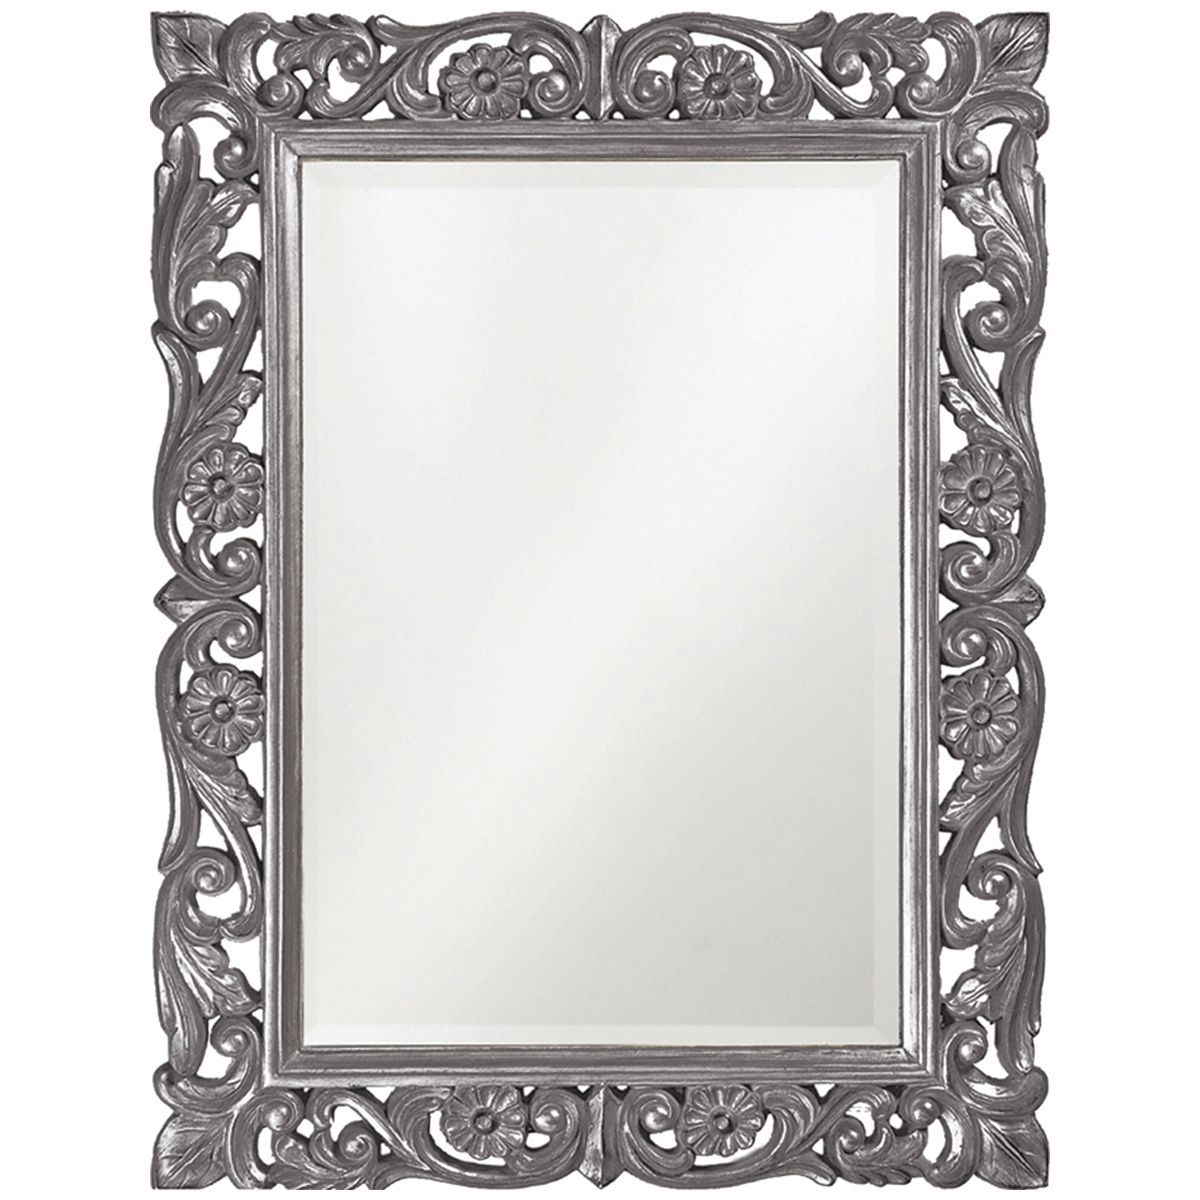 Howard Elliott Chateau Charcoal Gray Mirror 2113ch | Pink Wall Mirrors Inside Charcoal Gray Wall Mirrors (View 12 of 15)